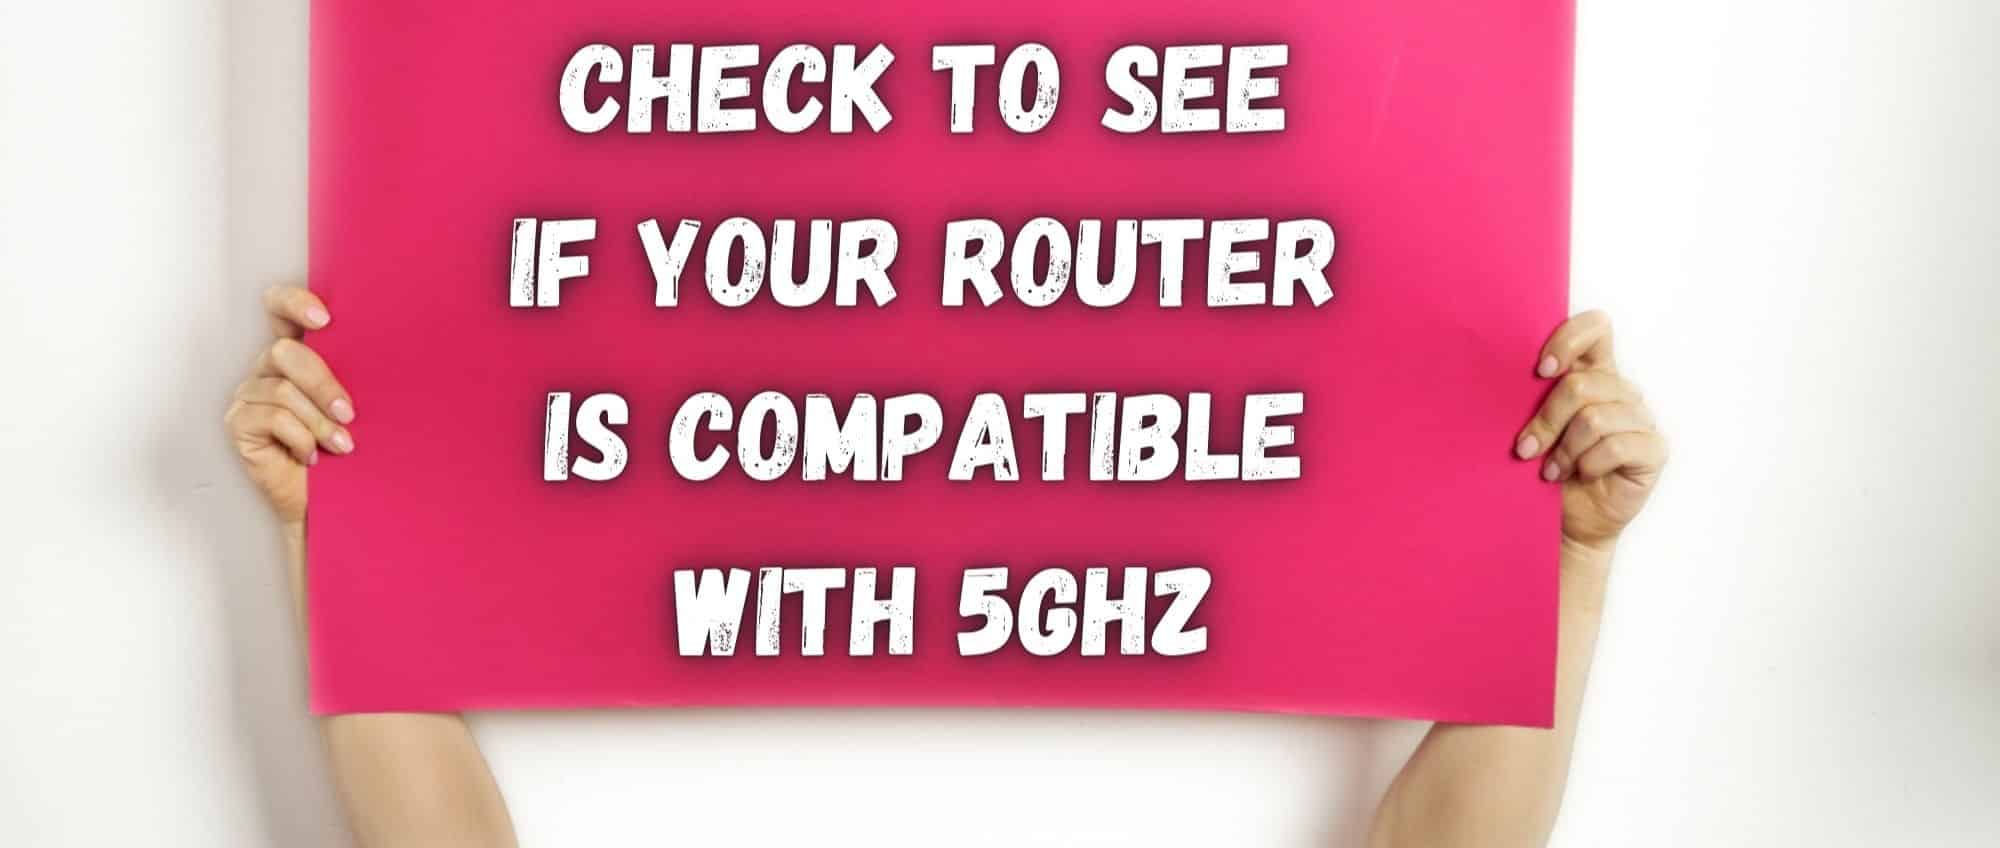 Check to see if your Router is Compatible with 5GHz